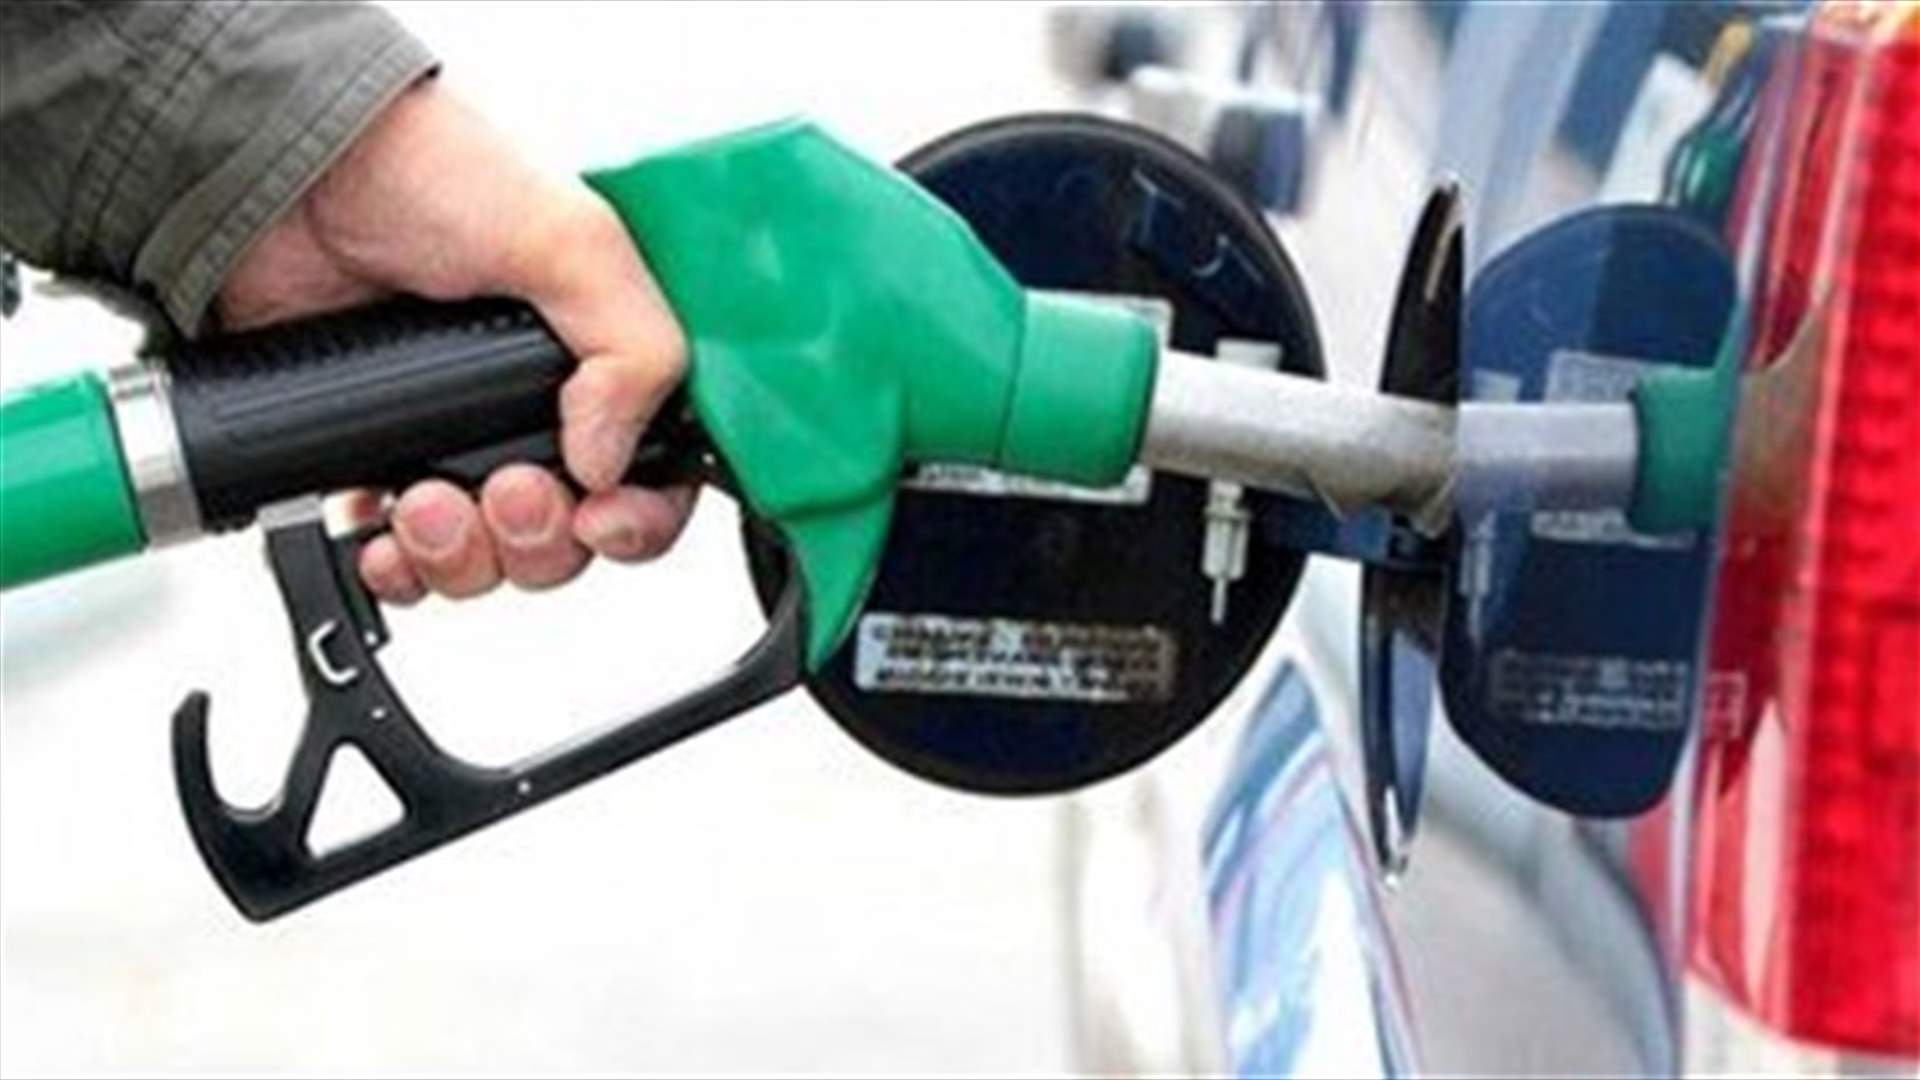 Price of 95 octane fuel increases 300 LBP